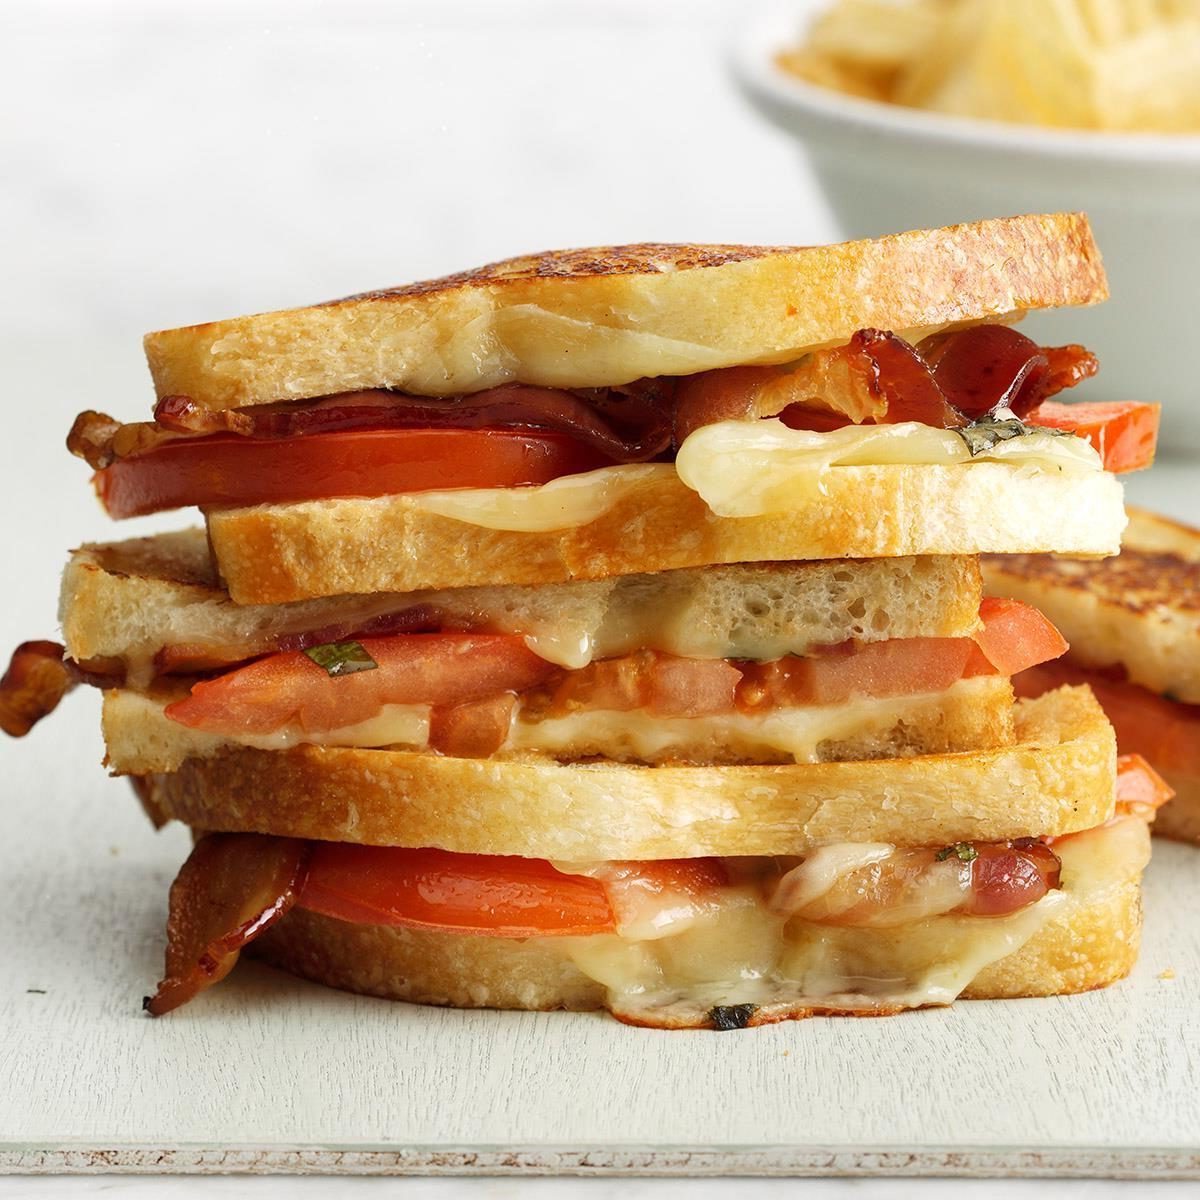 Grilled Cheese, Bacon and Oven-D.jpg